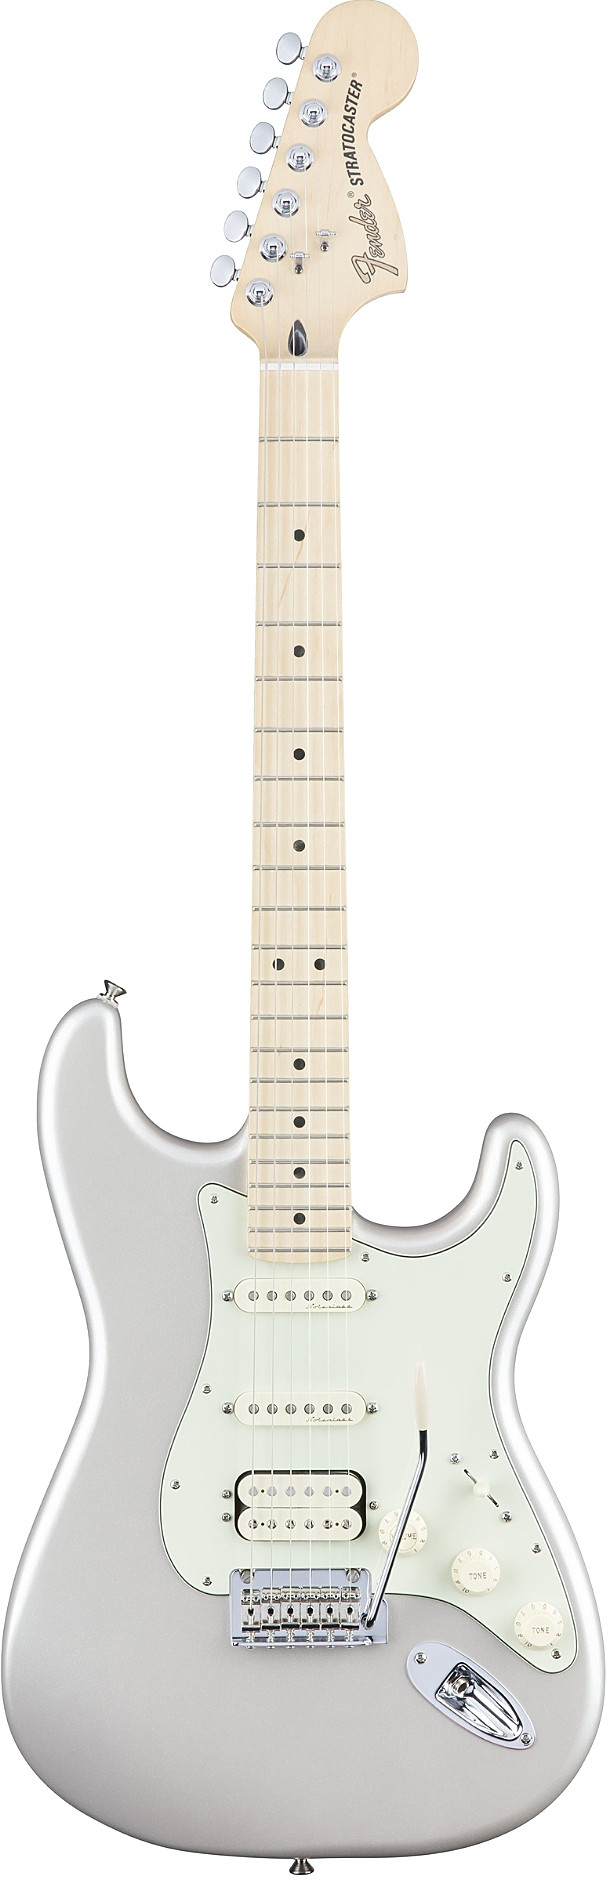 2017 Deluxe Stratocaster HSS by Fender